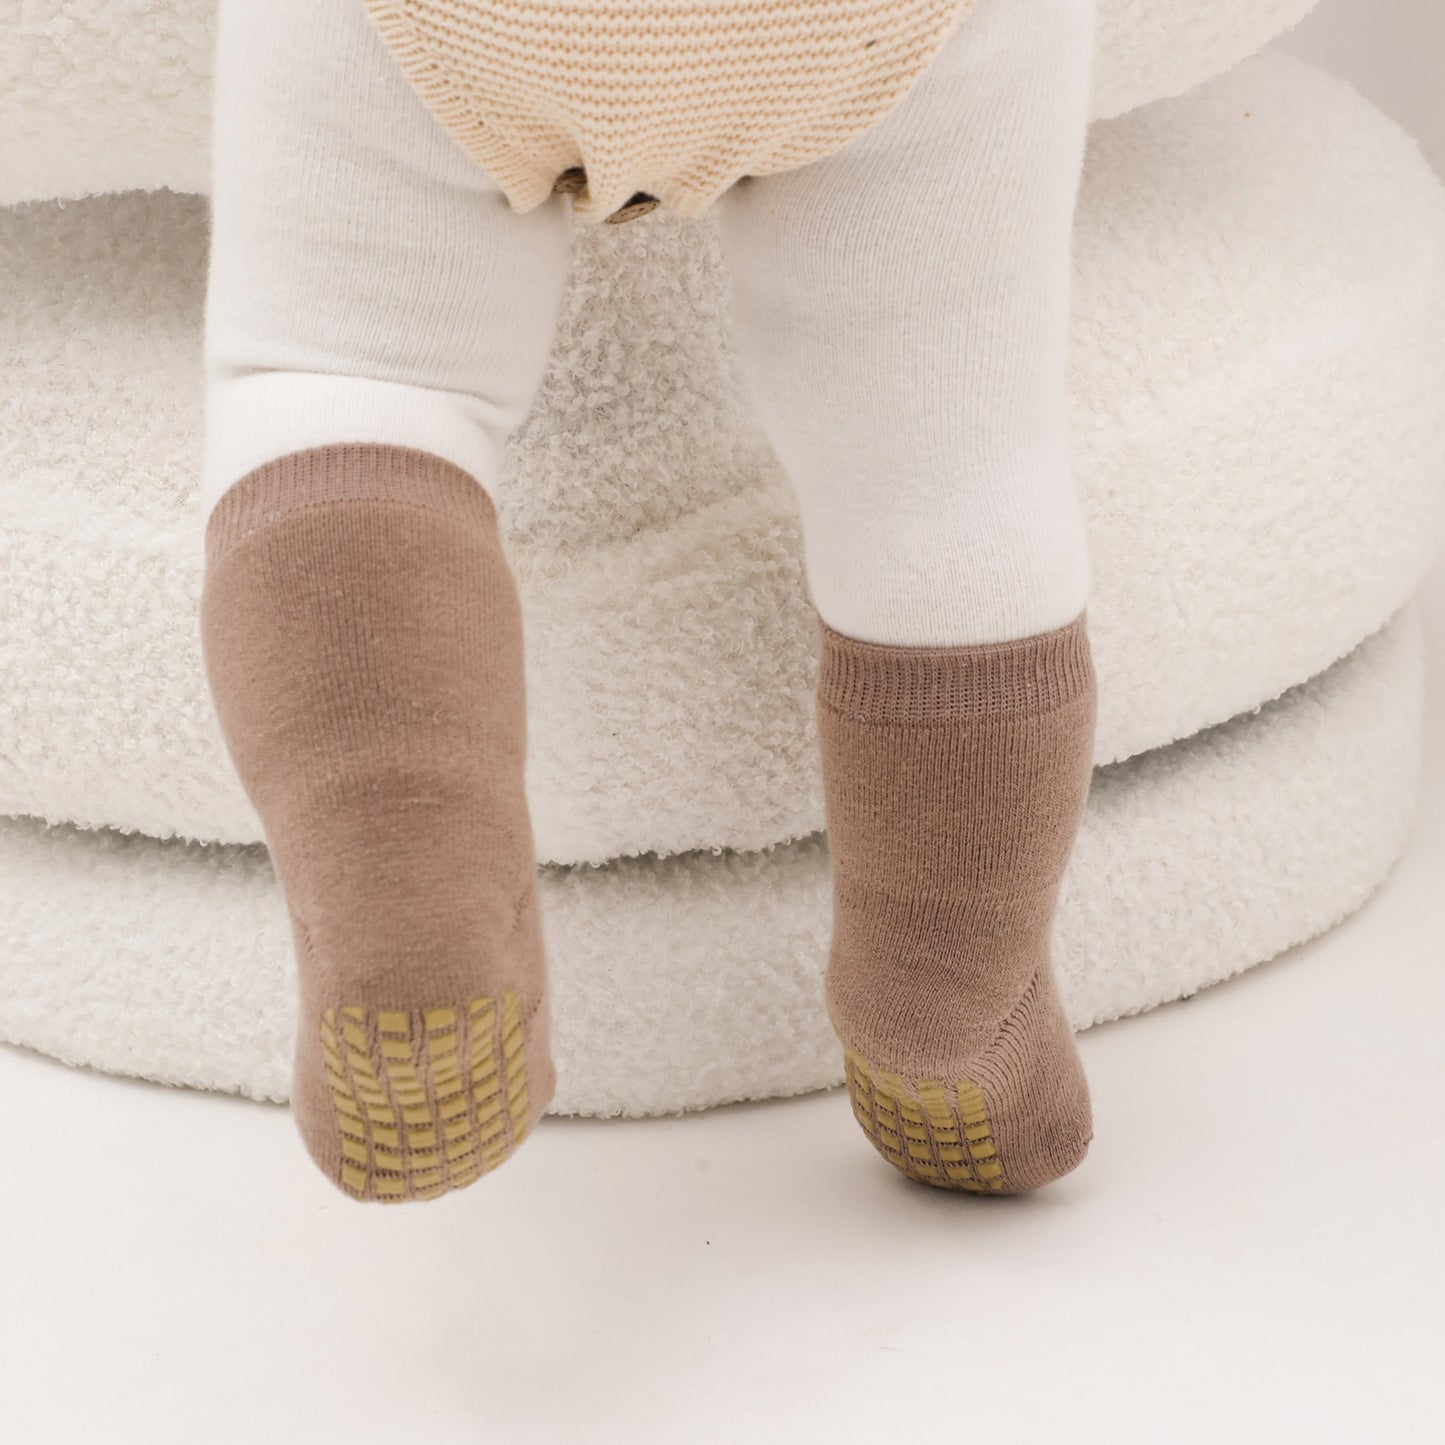 New-Big Balloon- Extra Warm - 4 Pairs of Stay-On Baby & Toddler Non-Slip Socks